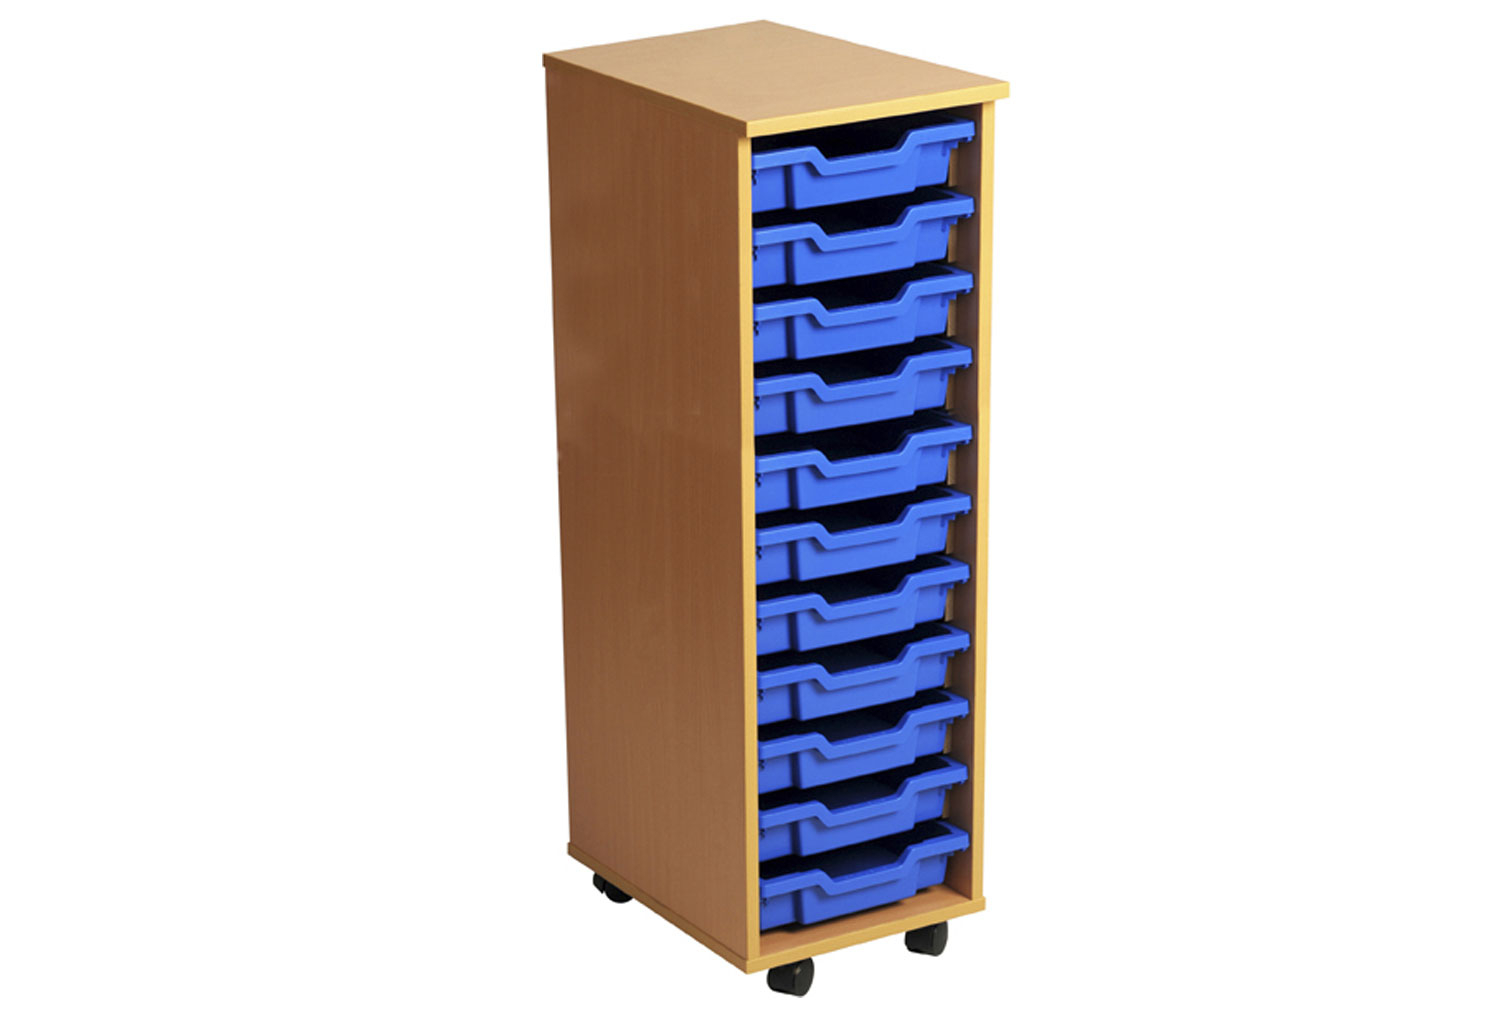 Primary Single Column Mobile Classroom Tray Storage Unit With 11 Shallow Classroom Trays, Beech/ Yellow Classroom Trays